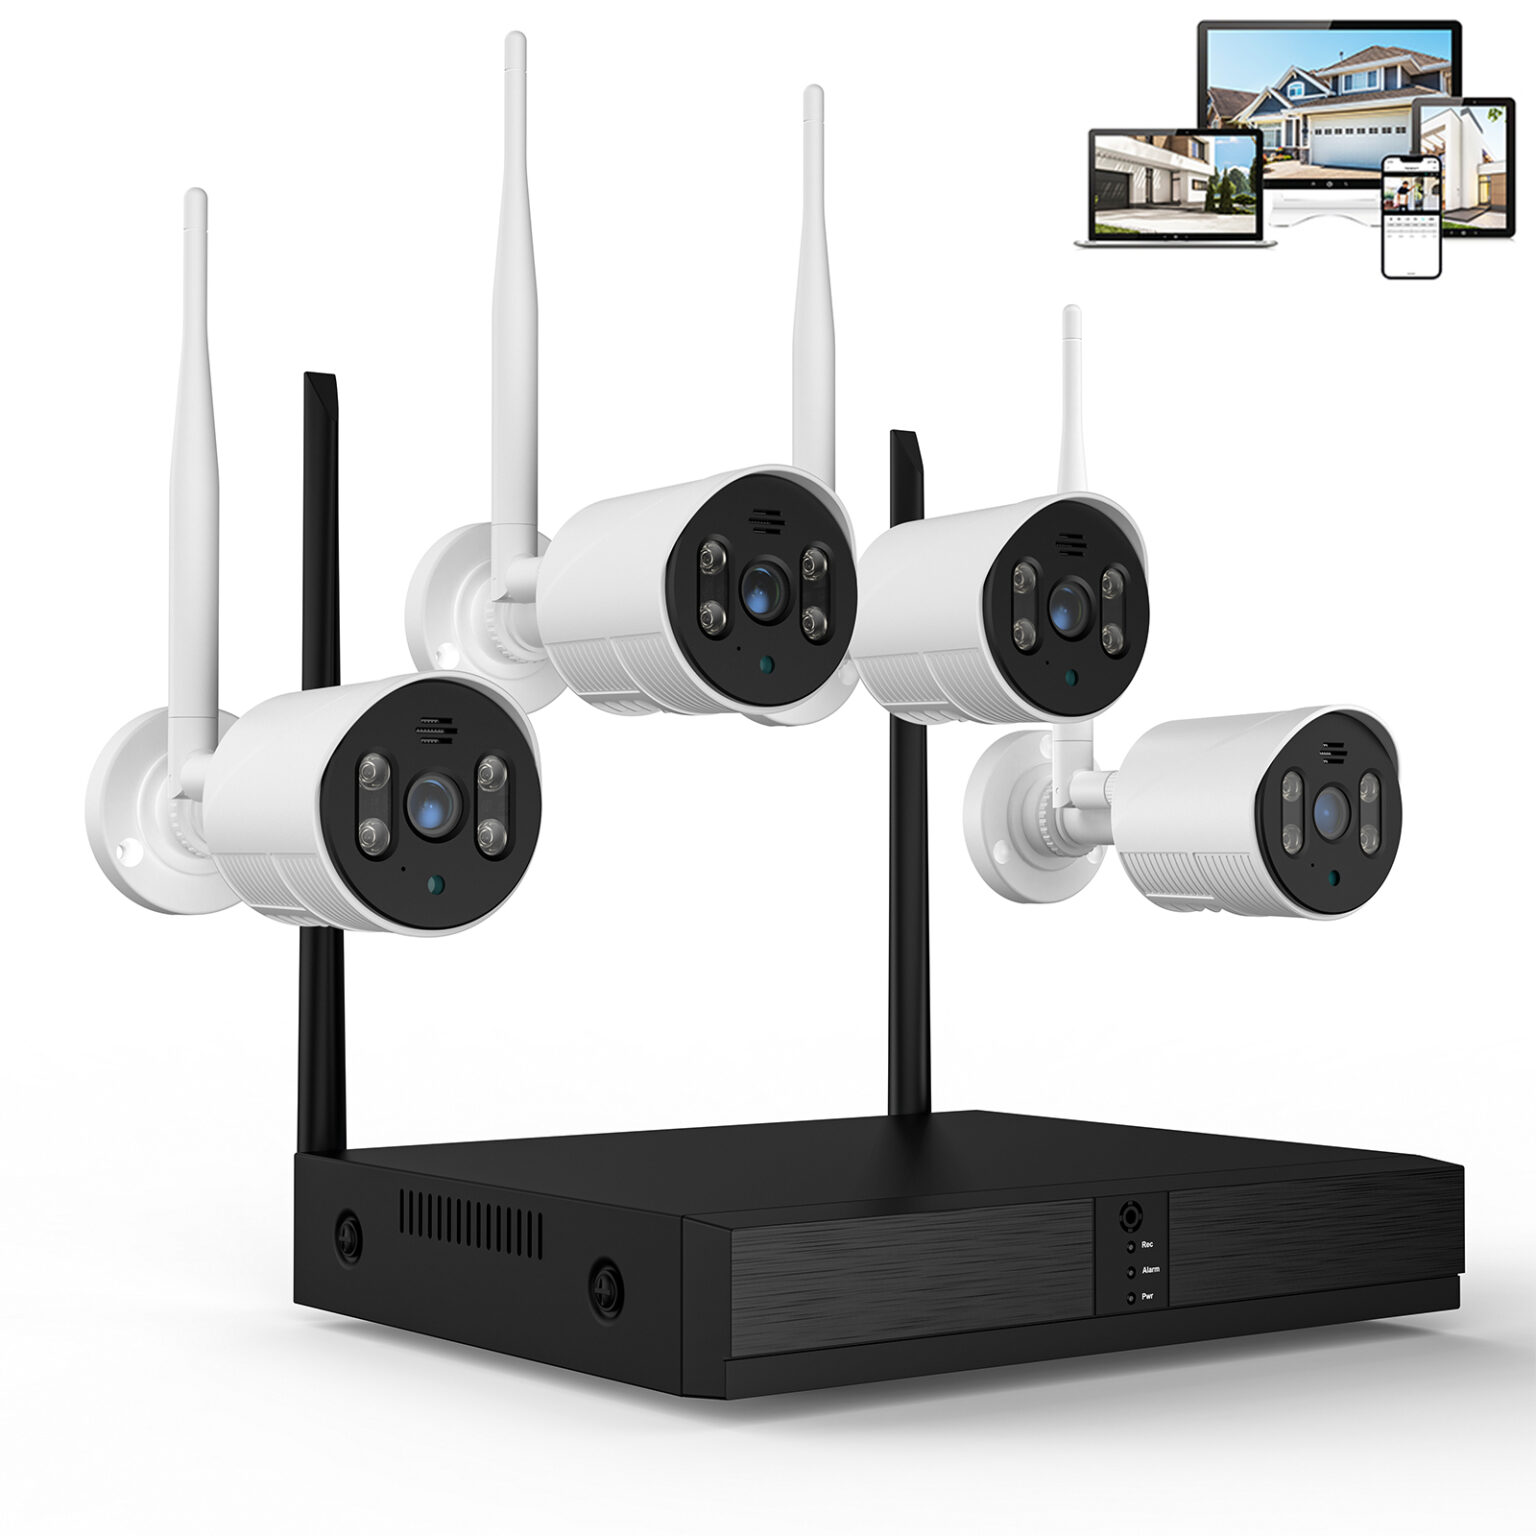 Topvision Security Camera System Wireless 8ch 3mp Nvr Home Security